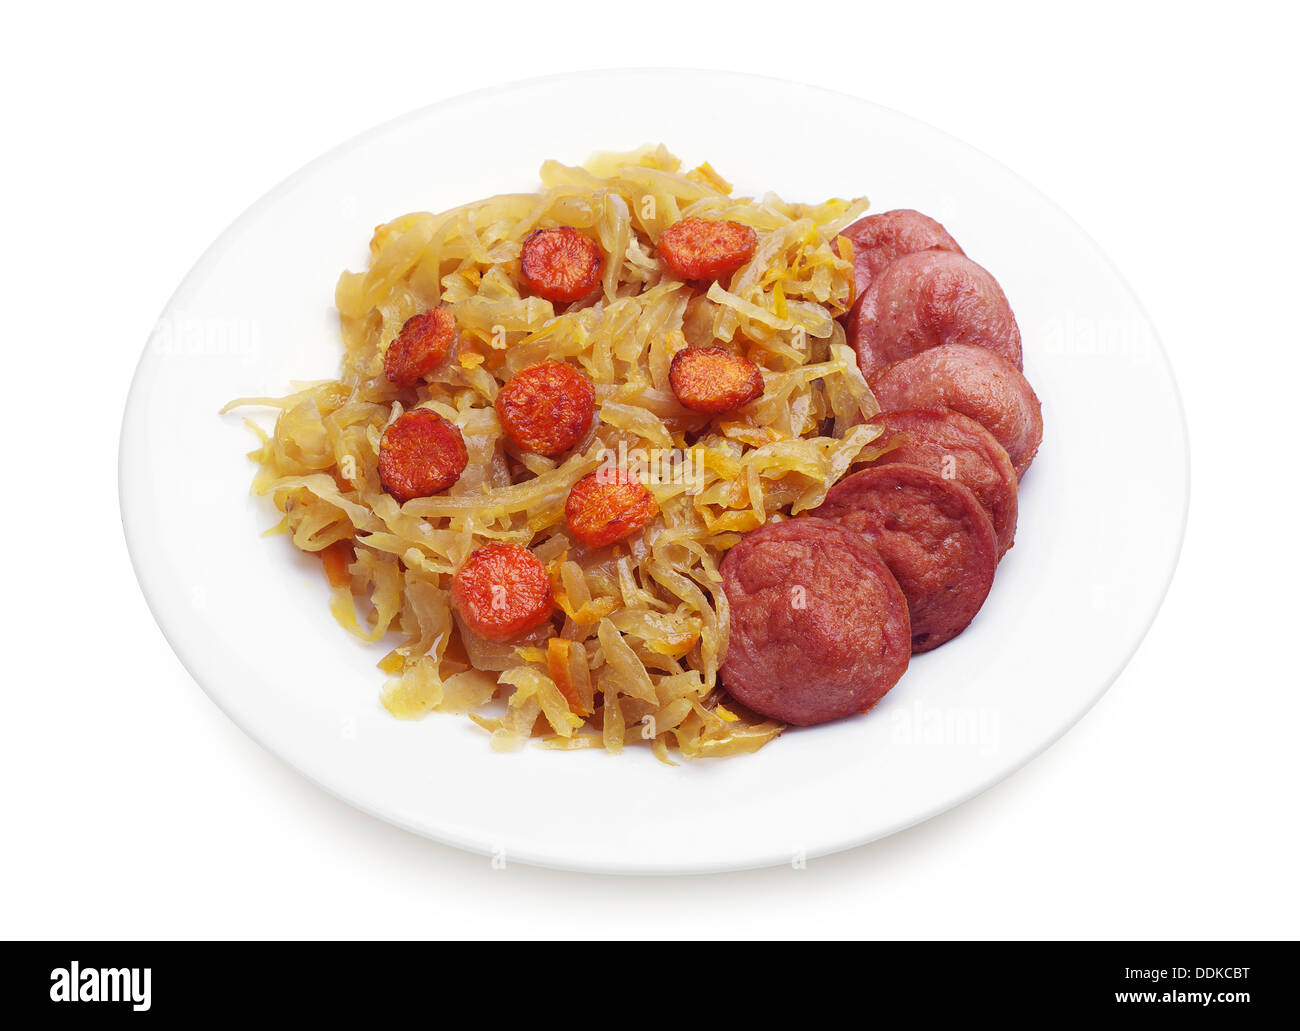 Braised cabbage with sausage in a plate on white Stock Photo